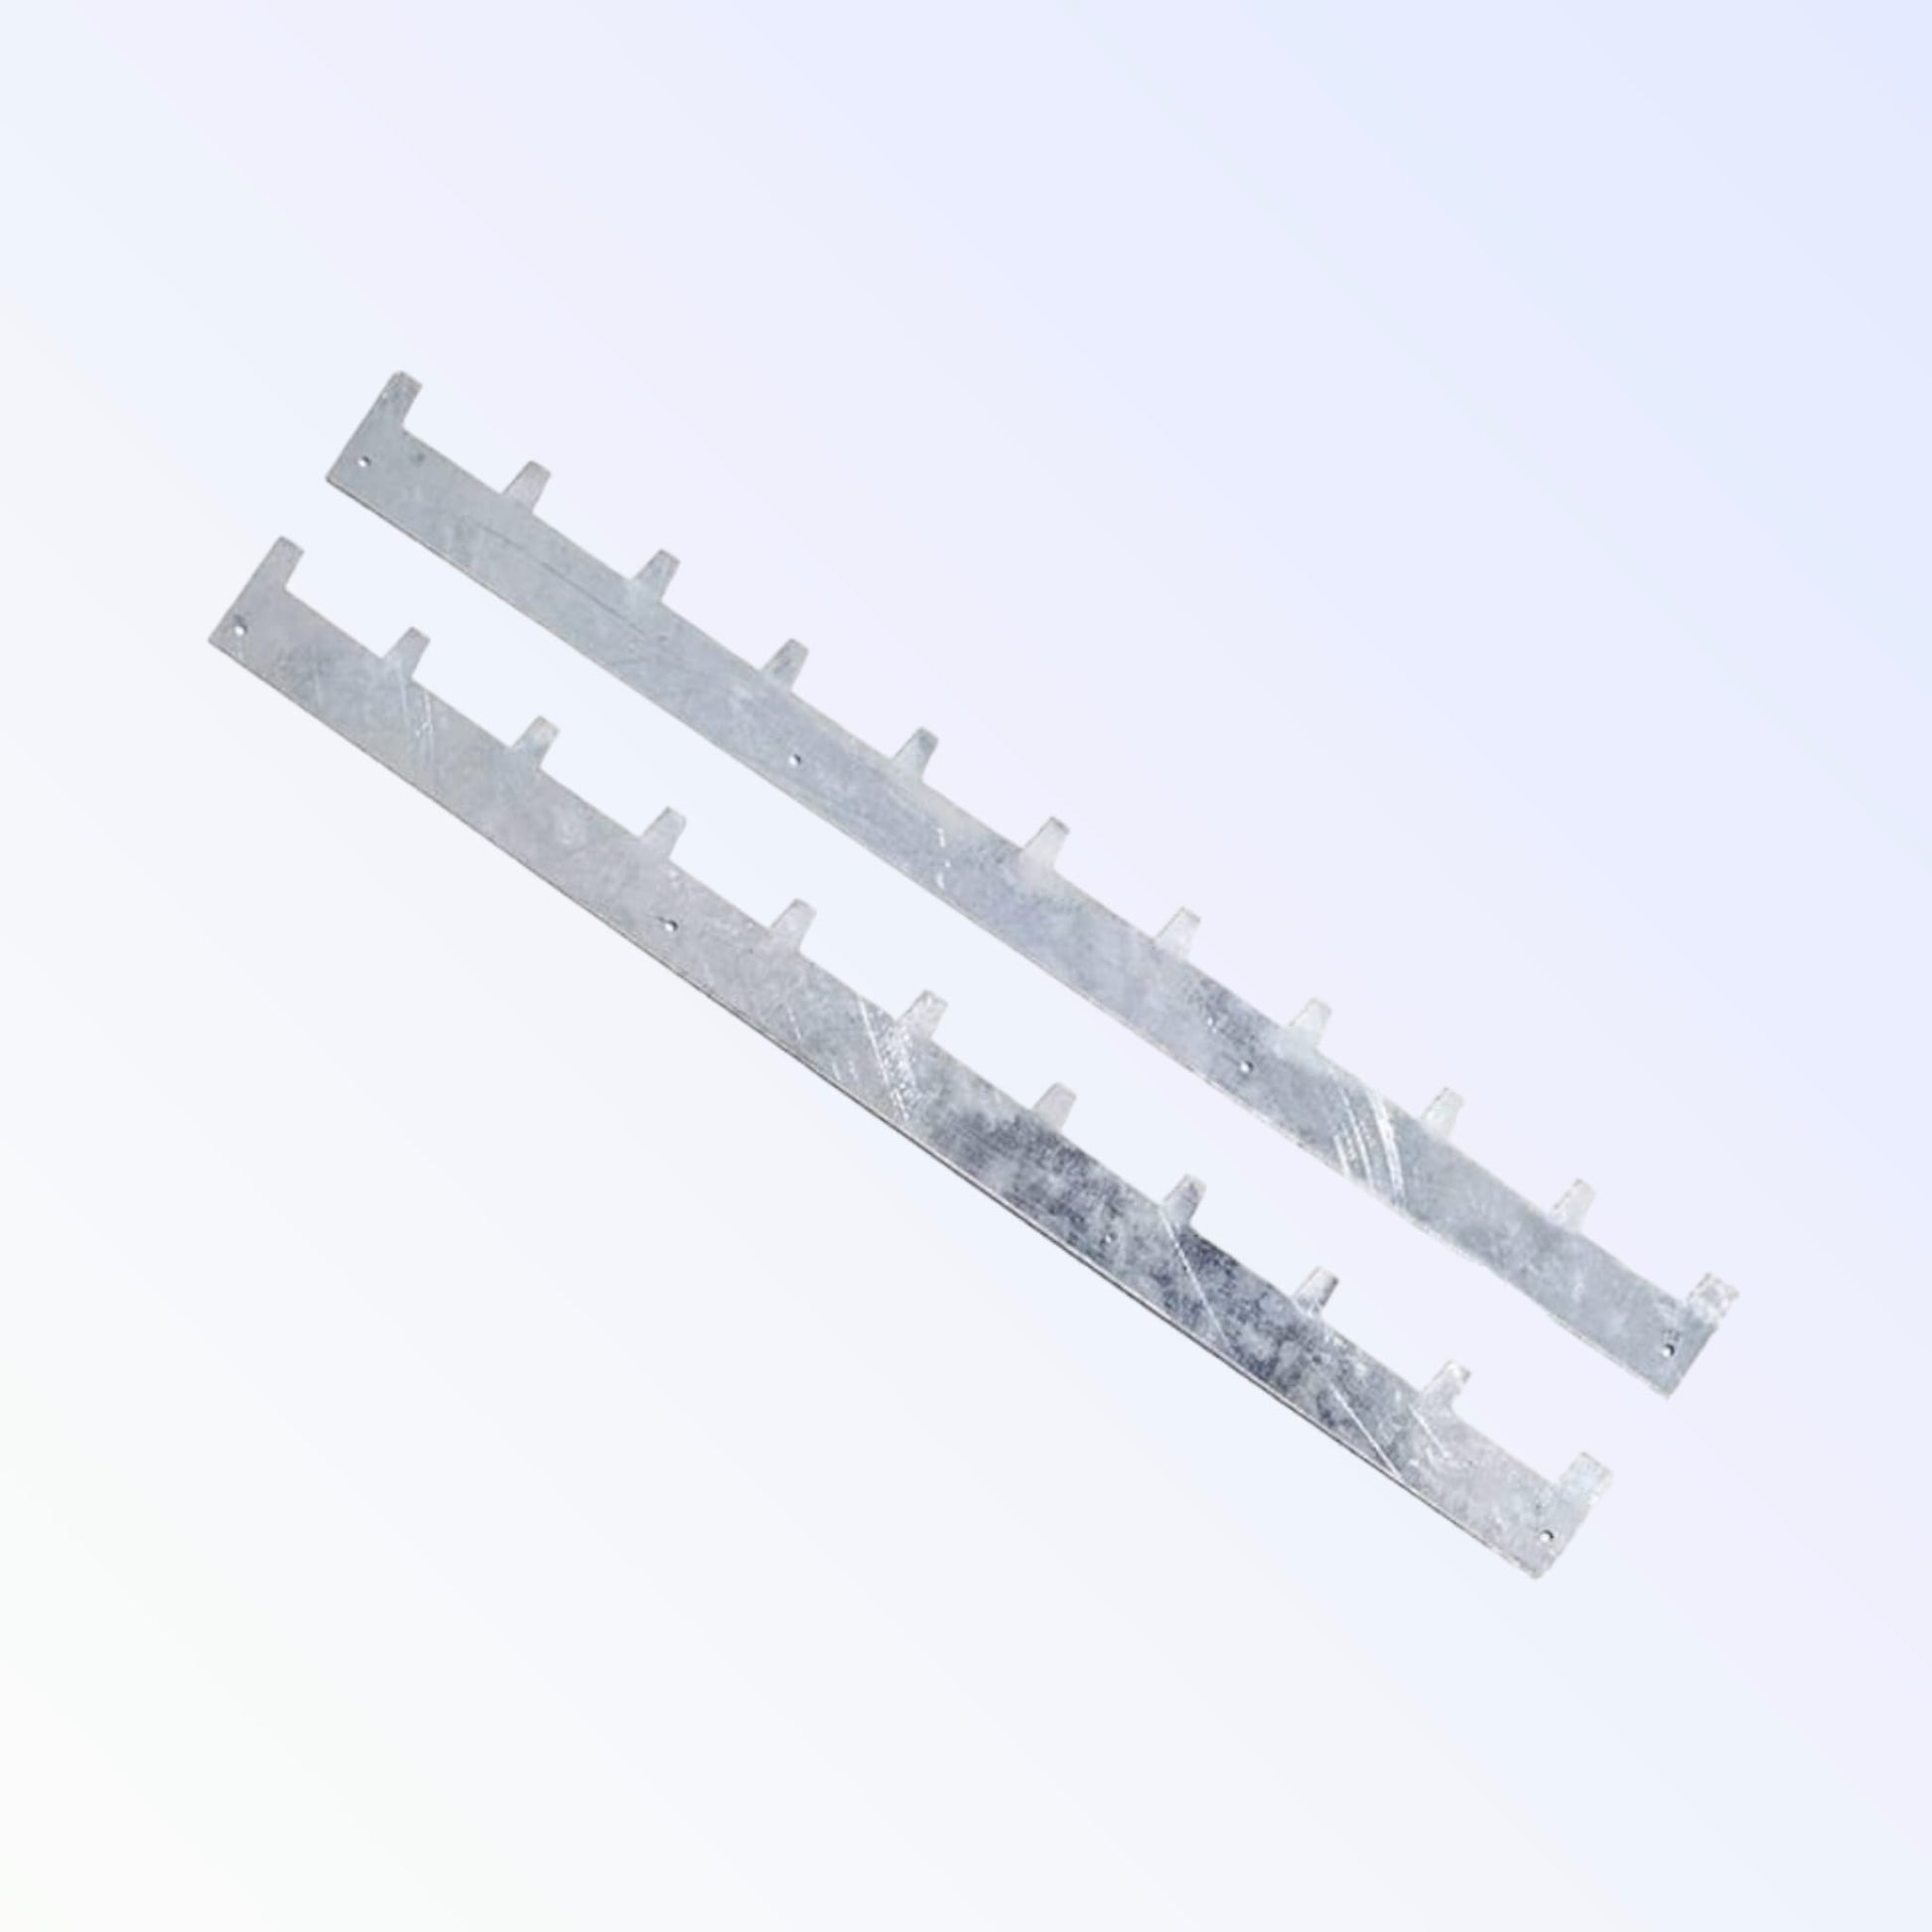 Castellated Spacers